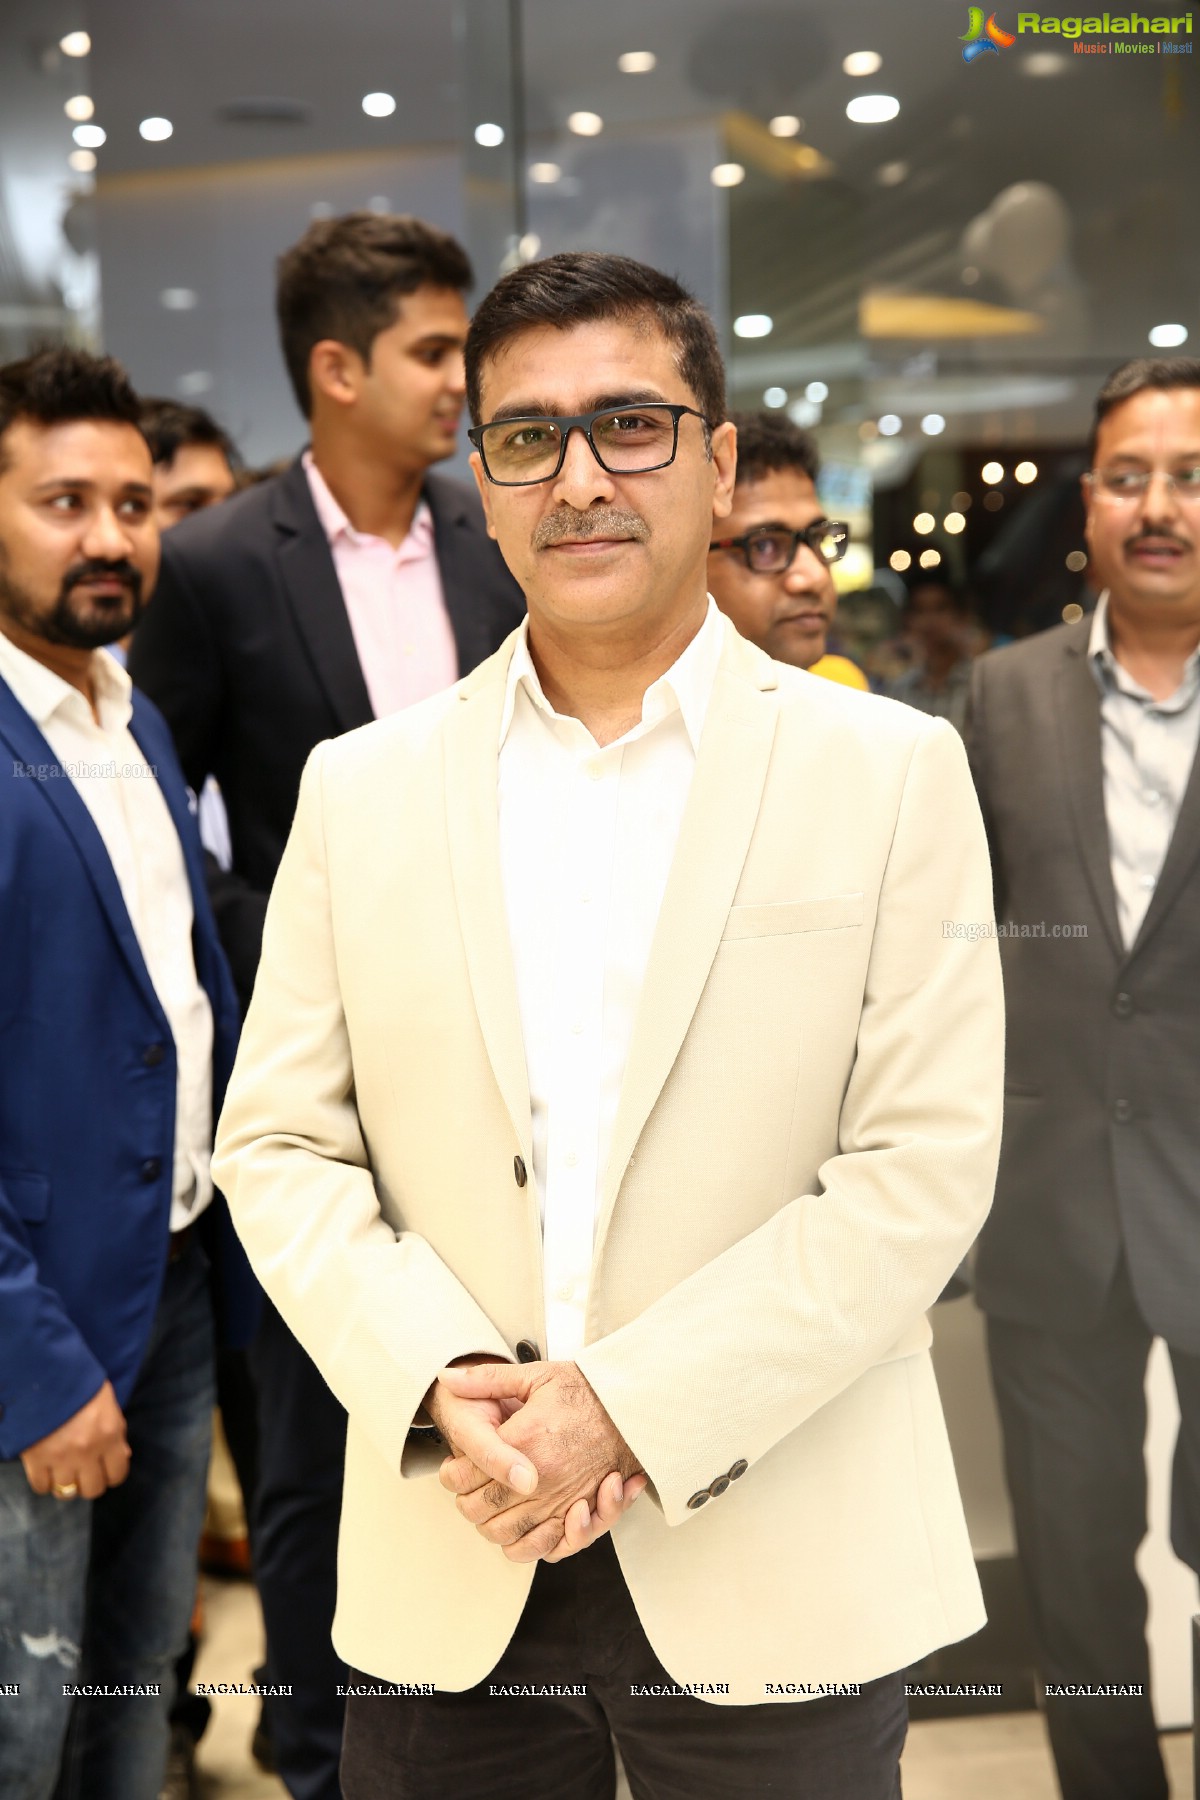 Casio Watches Launches Exclusive Casio Showroom at Sarath City Capital Mall